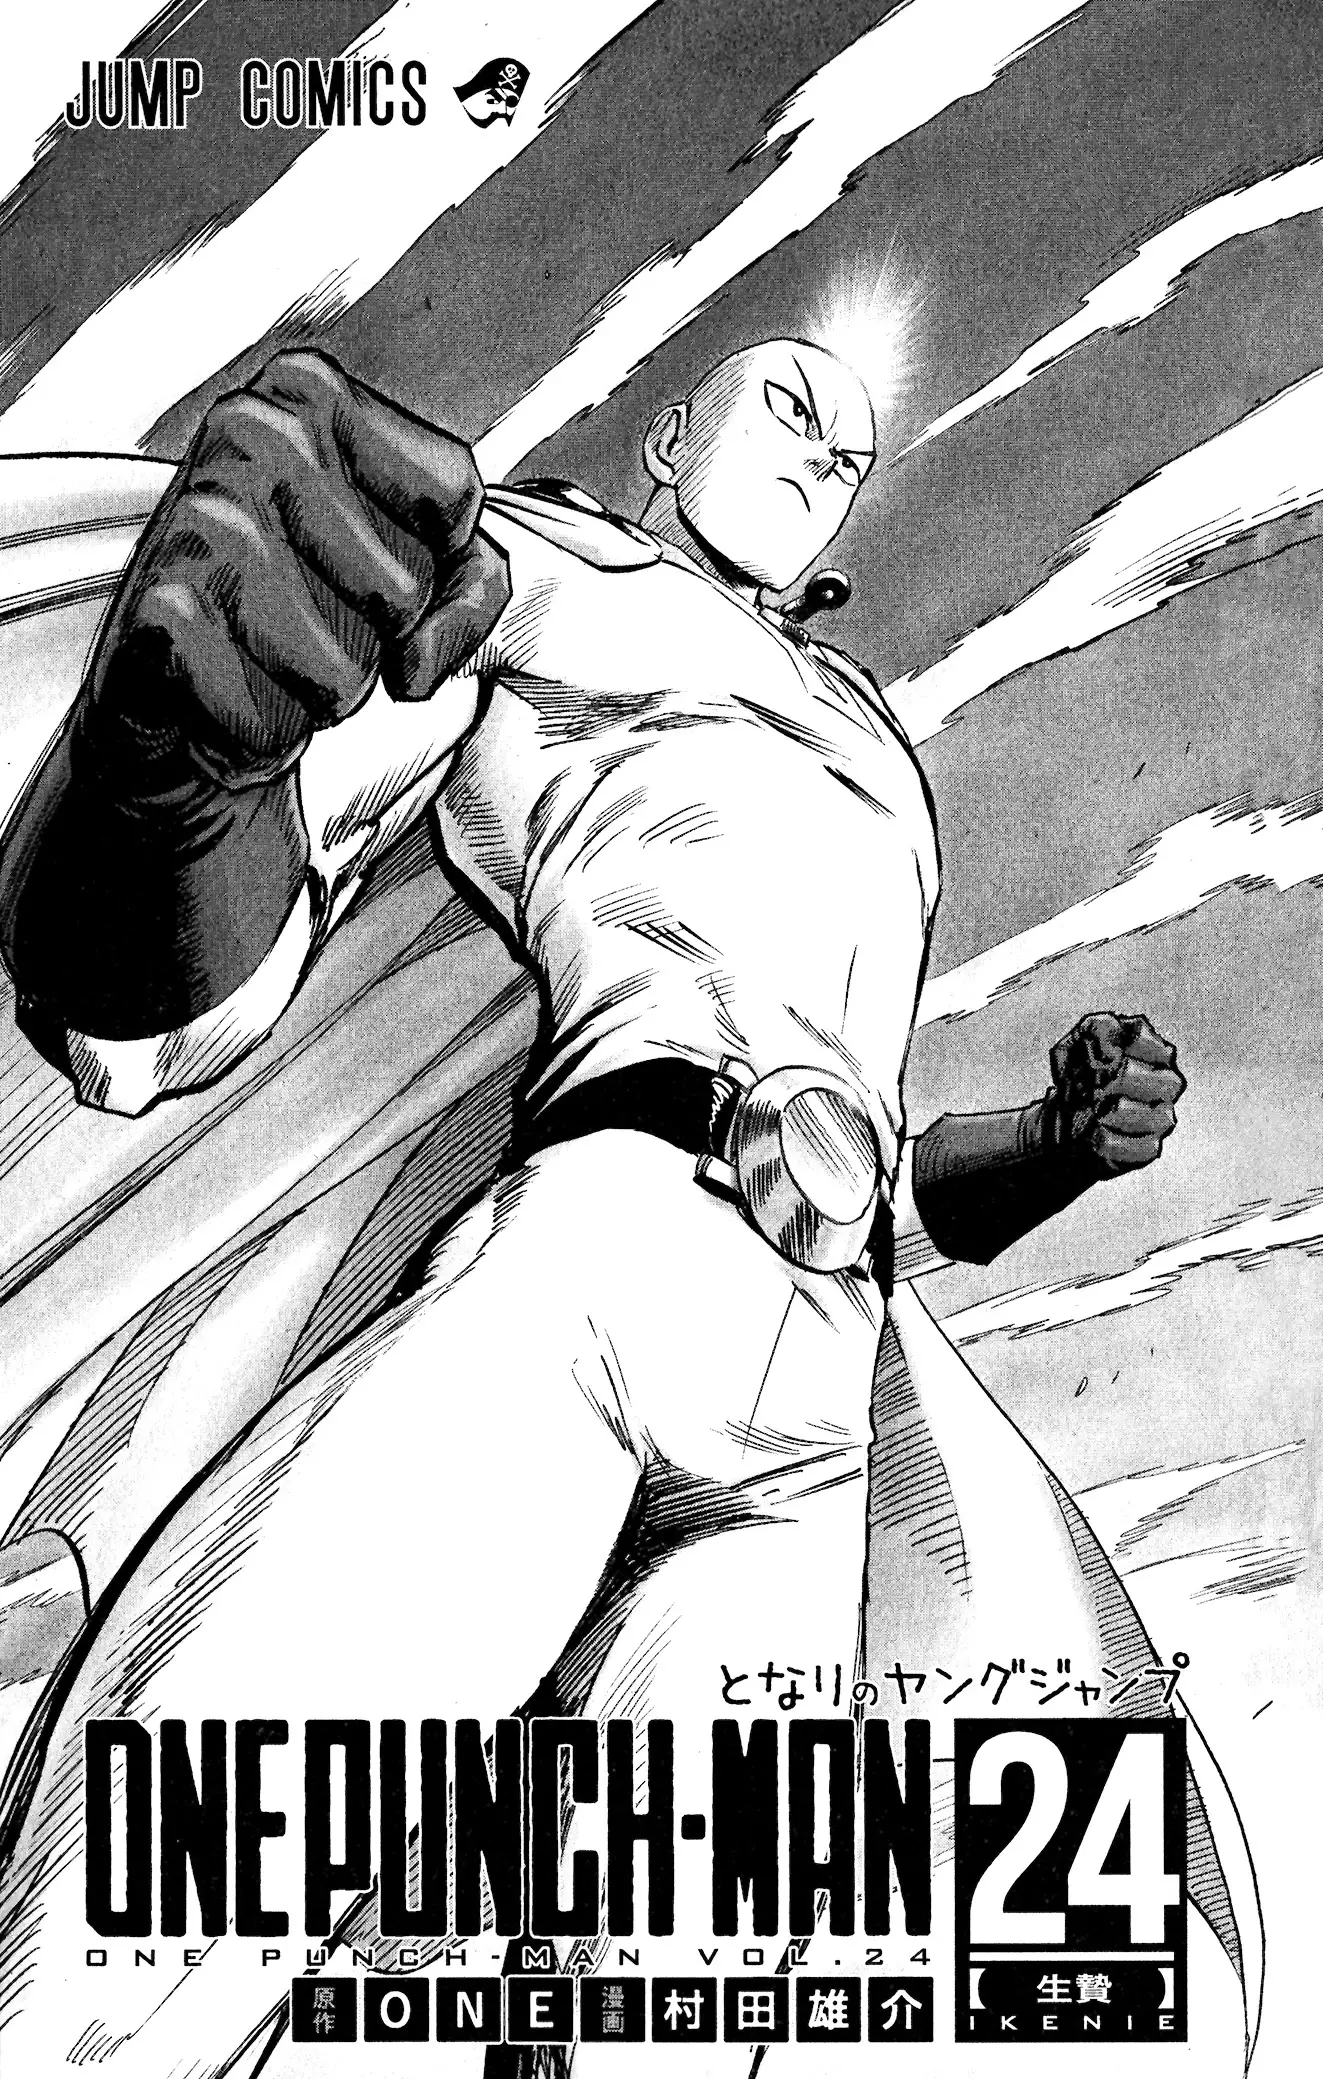 One Punch Man Chapter 154.6, READ One Punch Man Chapter 154.6 ONLINE, lost in the cloud genre,lost in the cloud gif,lost in the cloud girl,lost in the cloud goods,lost in the cloud goodreads,lost in the cloud,lost ark cloud gaming,lost odyssey cloud gaming,lost in the cloud fanart,lost in the cloud fanfic,lost in the cloud fandom,lost in the cloud first kiss,lost in the cloud font,lost in the cloud ending,lost in the cloud episode 97,lost in the cloud edit,lost in the cloud explained,lost in the cloud dog,lost in the cloud discord server,lost in the cloud desktop wallpaper,lost in the cloud drawing,can't find my cloud on network,lost in the cloud characters,lost in the cloud chapter 93 release date,lost in the cloud birthday,lost in the cloud birthday art,lost in the cloud background,lost in the cloud banner,lost in the clouds meaning,what is the black cloud in lost,lost in the cloud ao3,lost in the cloud anime,lost in the cloud art,lost in the cloud author twitter,lost in the cloud author instagram,lost in the cloud artist,lost in the cloud acrylic stand,lost in the cloud artist twitter,lost in the cloud art style,lost in the cloud analysis